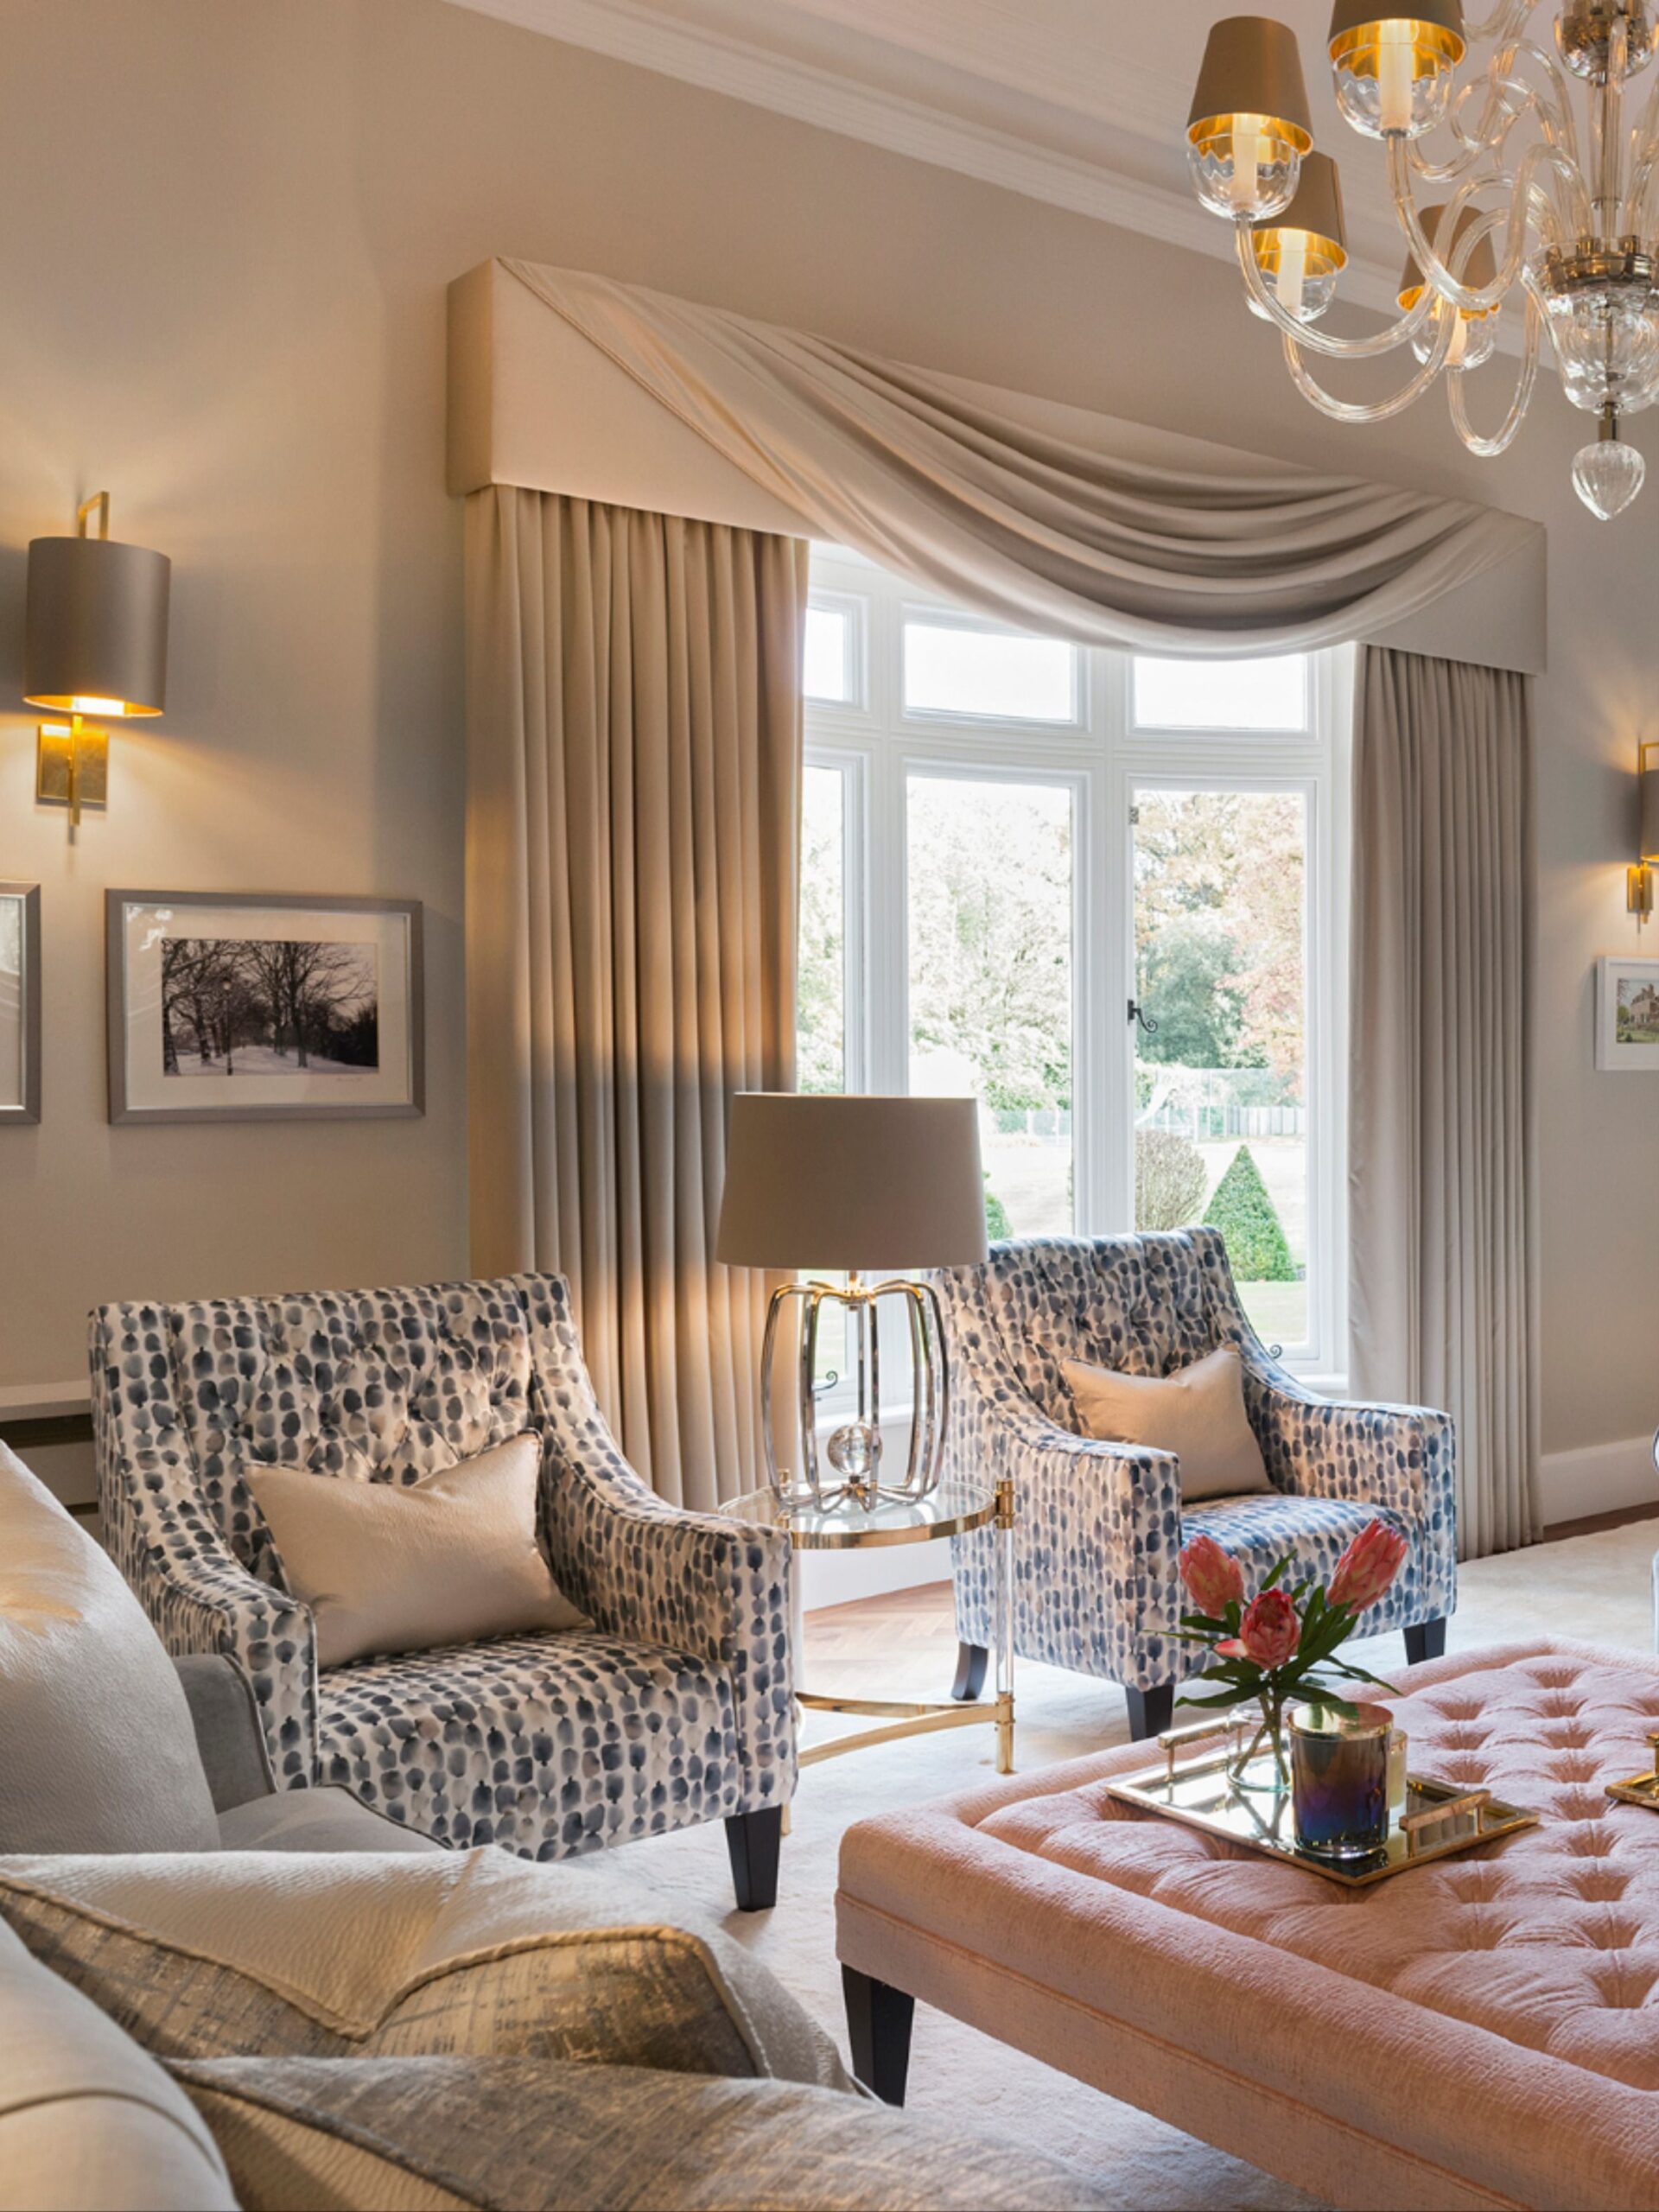 Luxury Curtains: Elevating Your Home Decor with Opulent Fabrics